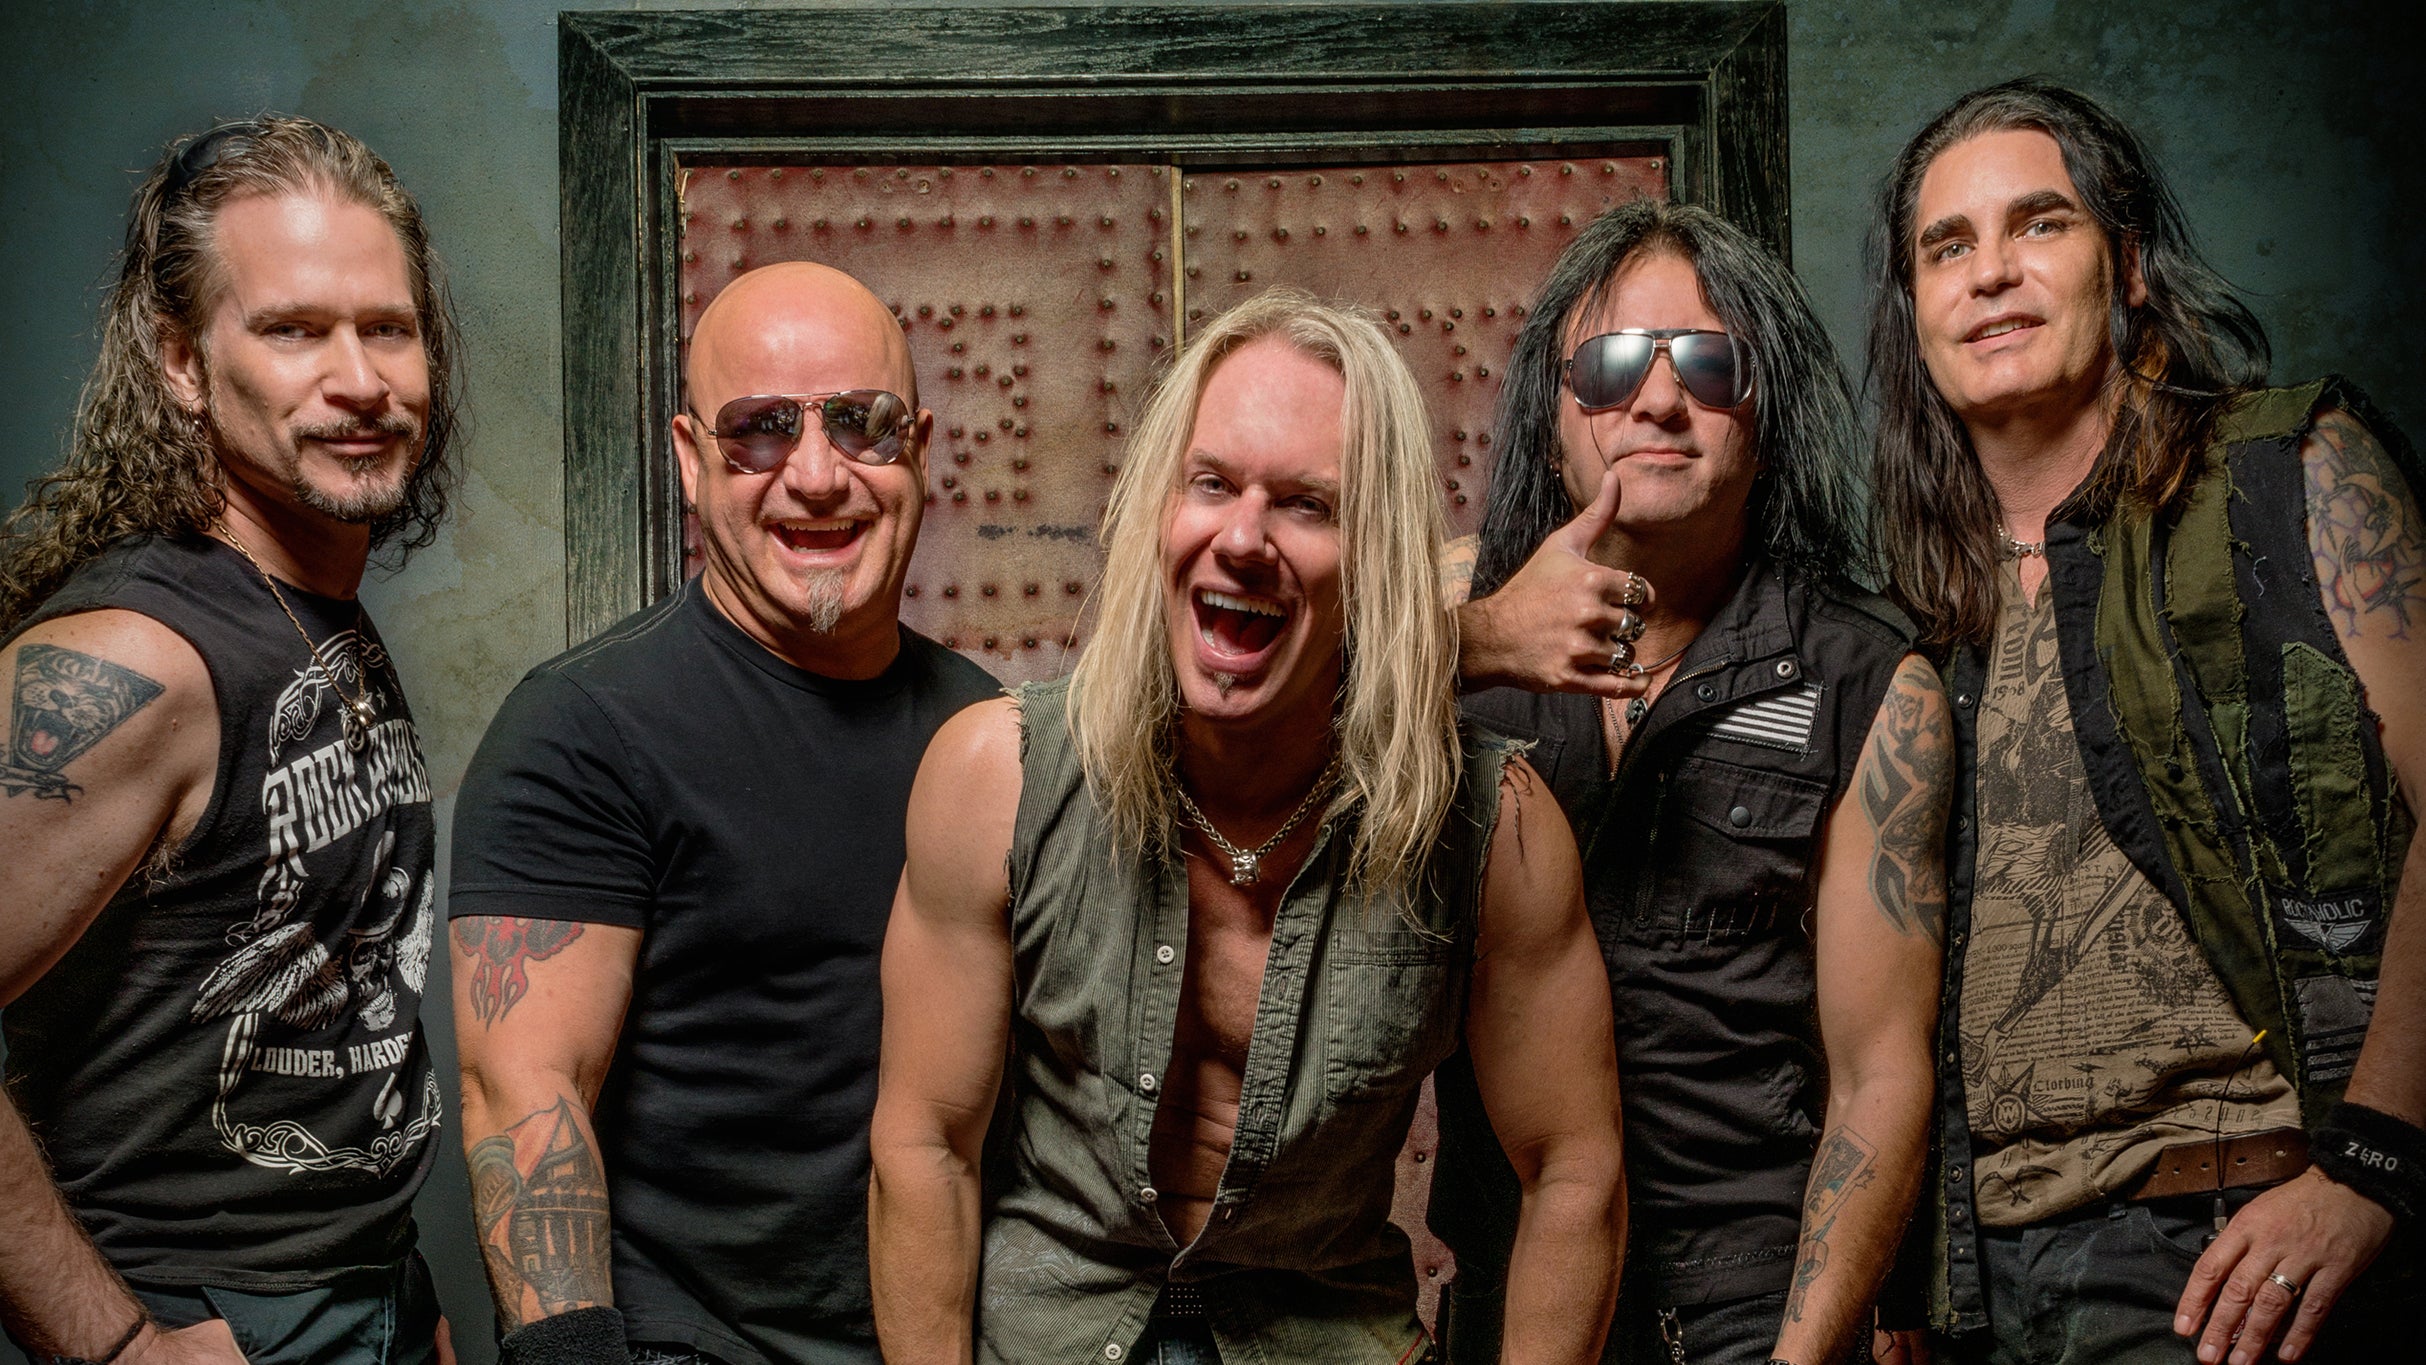 Warrant: Let the Good Times Rock Tour presale code for event tickets in Grantville, PA (Hollywood Casino at Penn National Race Course)